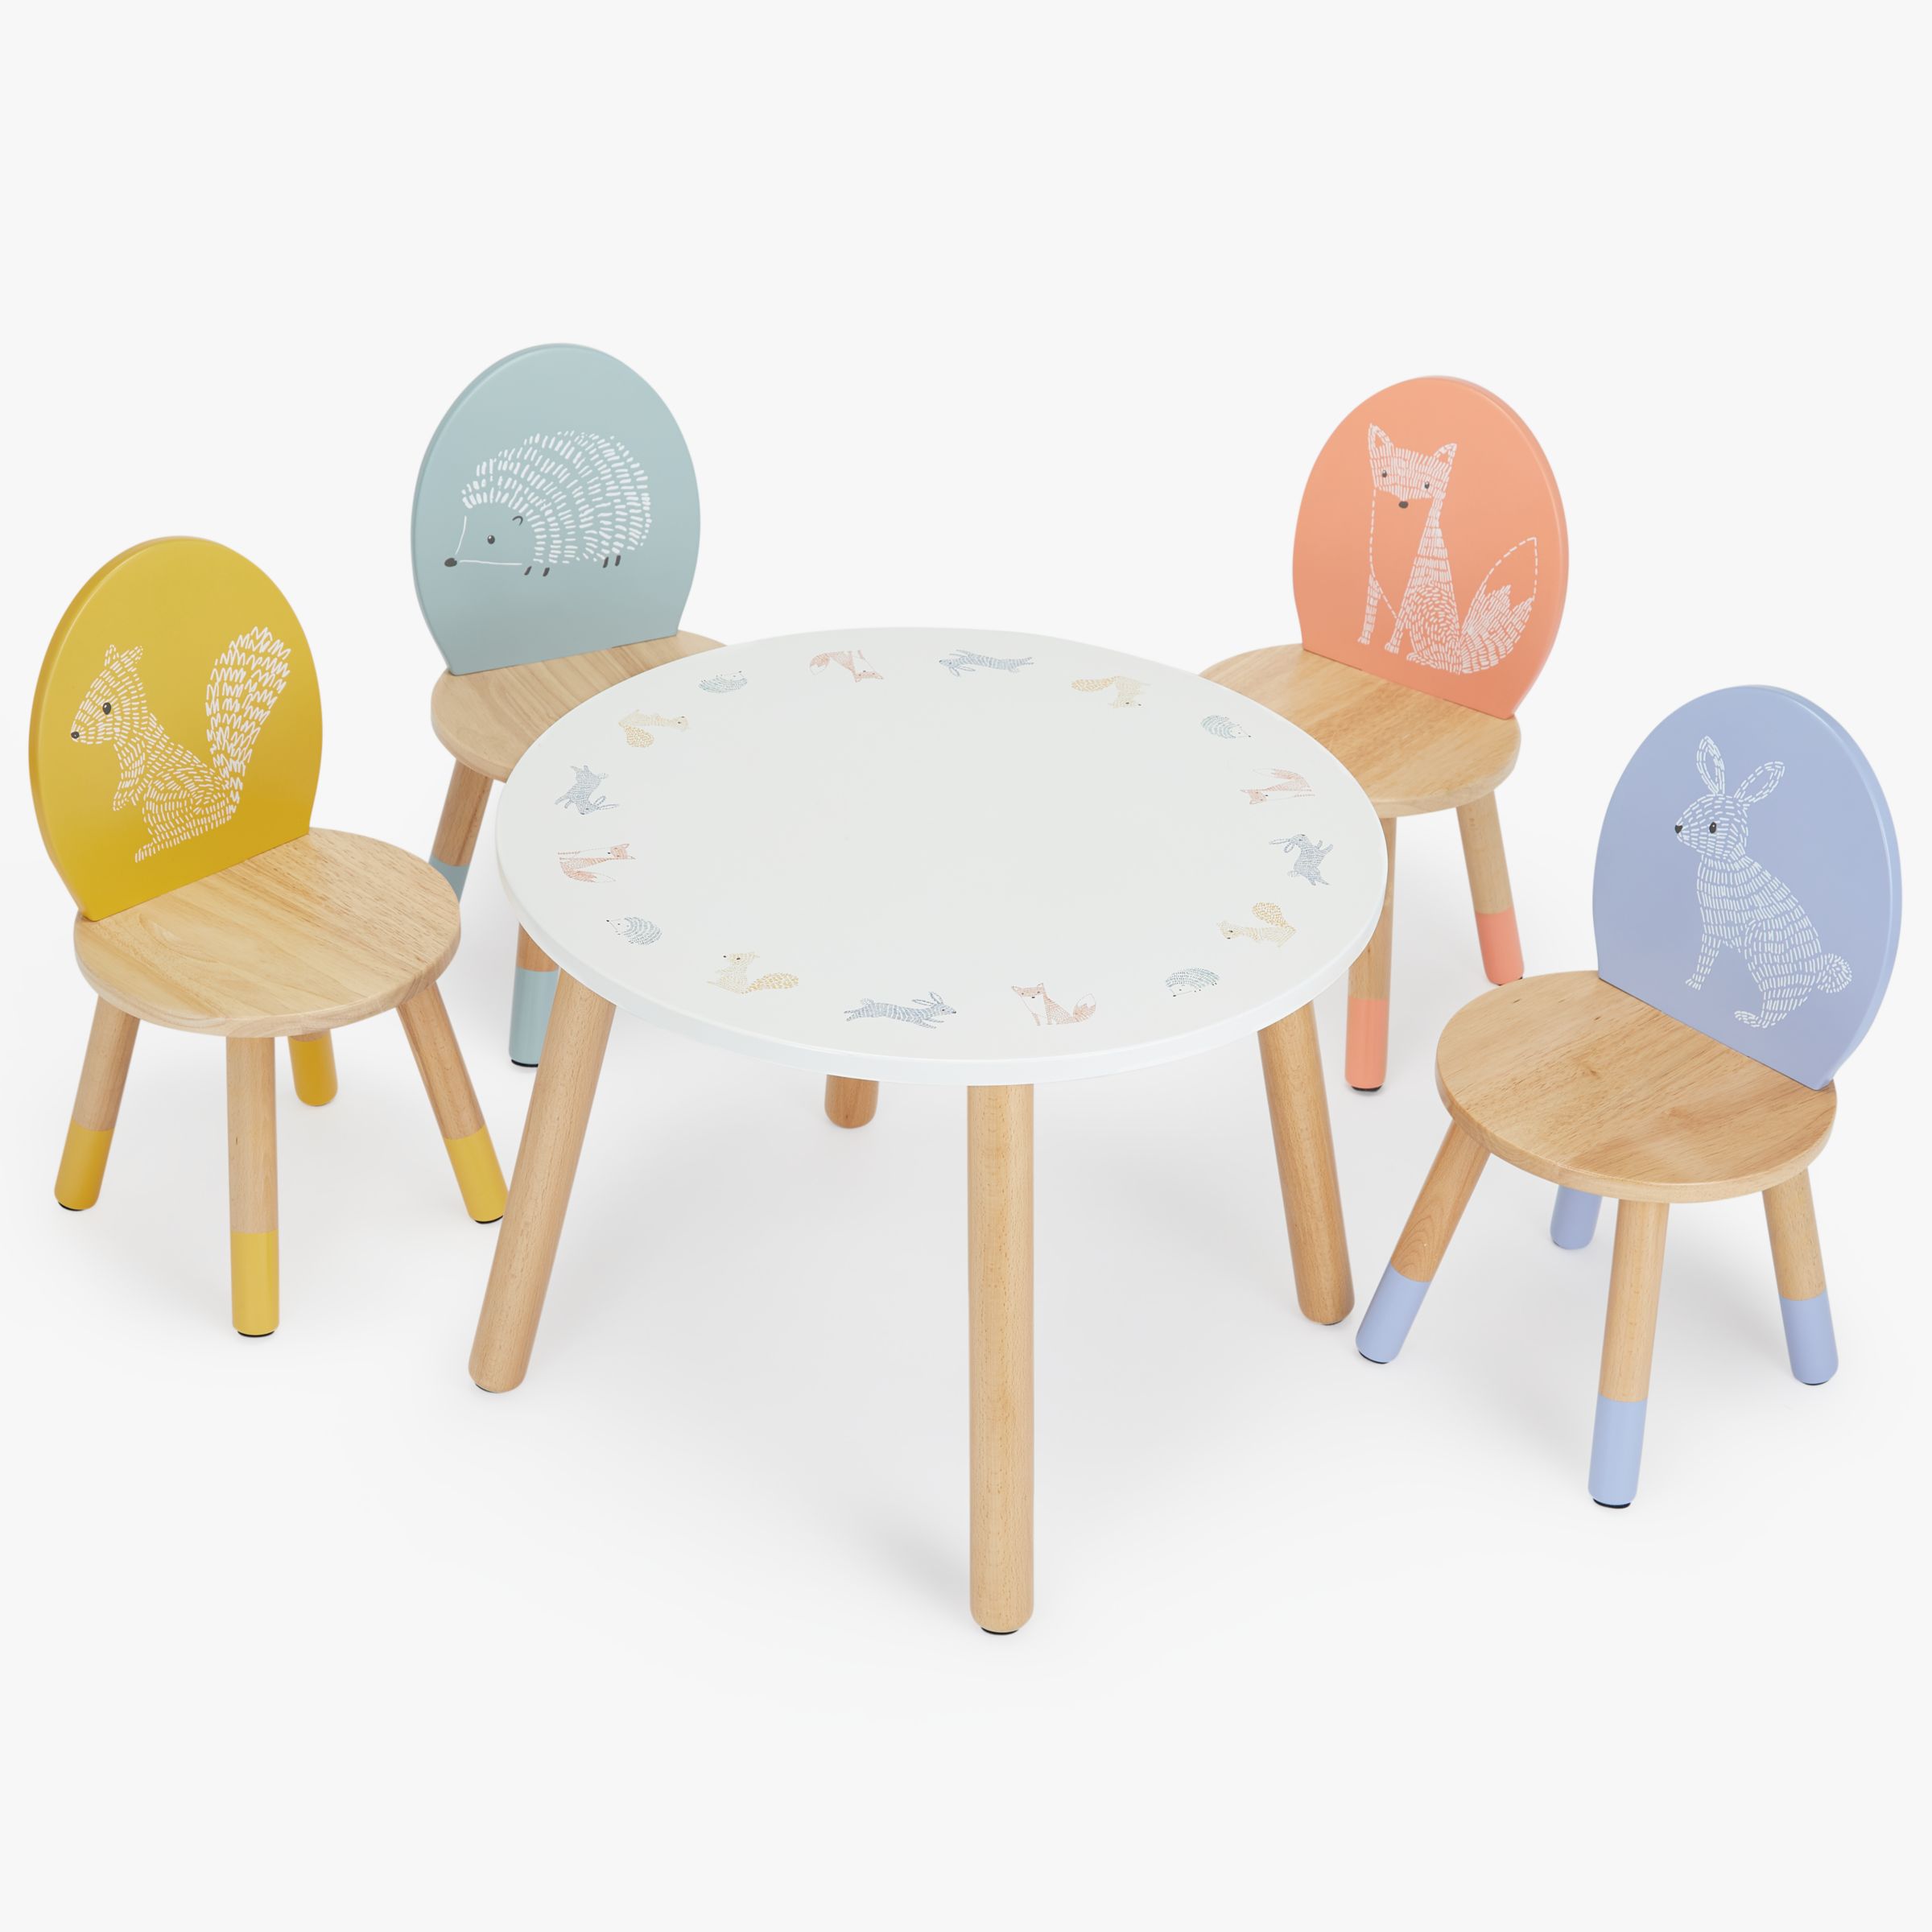 John Lewis Baby Forest Friends Table at 